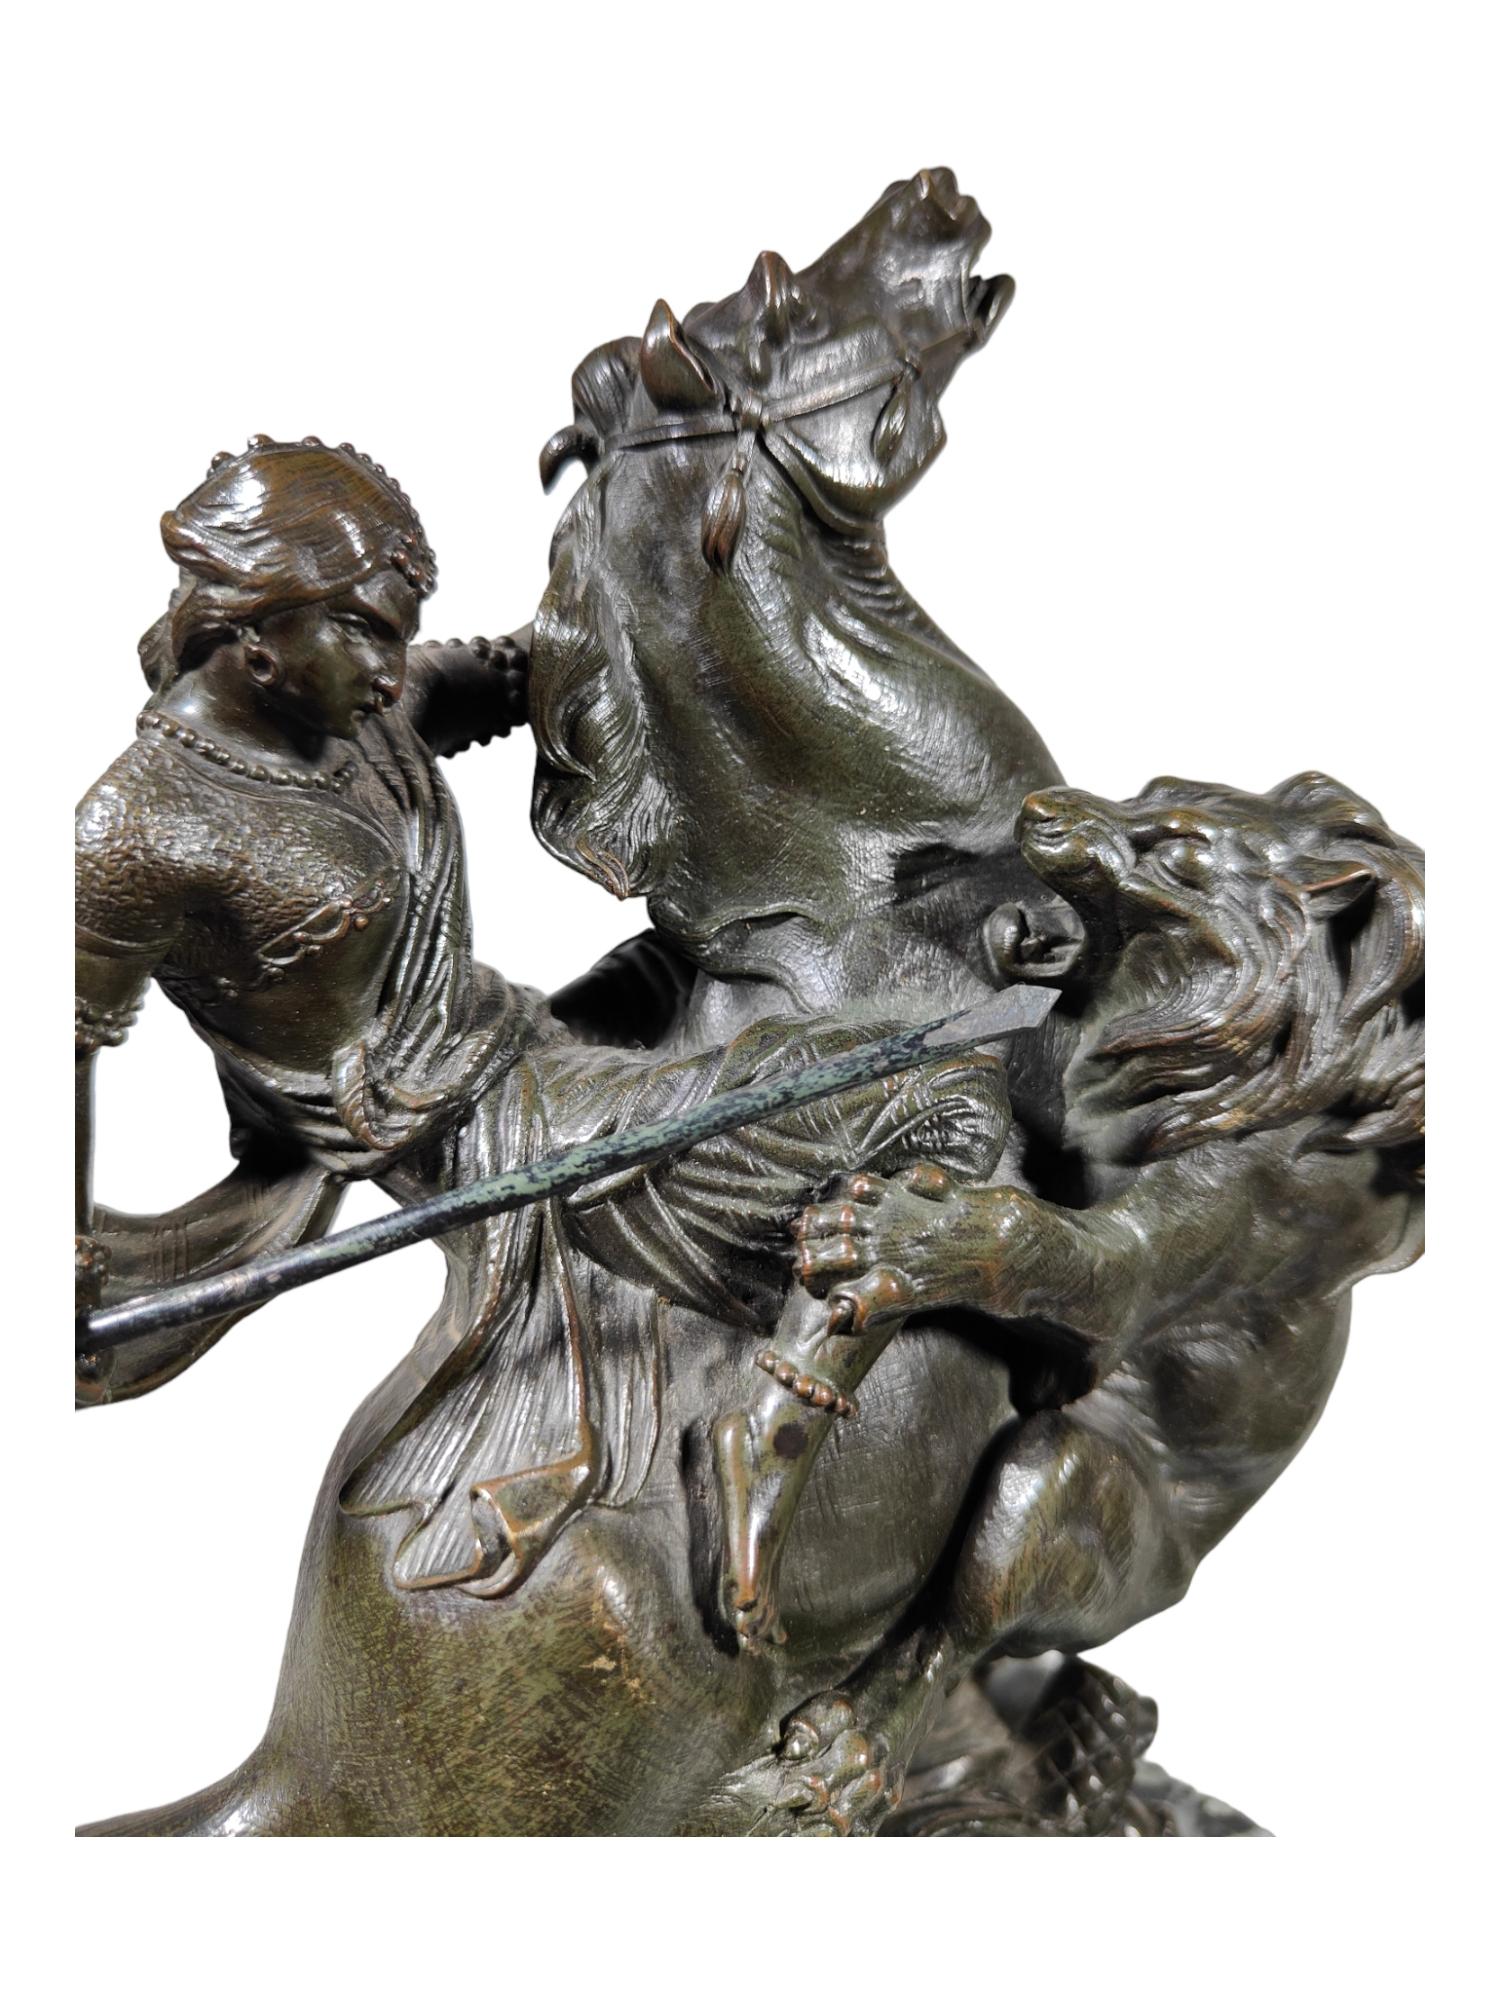 Amazon on horseback attacked by a Tiger August-Karl-Edouard Kiss bronze statue Germany
The mounted amazon attacked by a lion was the work of German sculptor Auguste Kiss. Caught in the midst of the attack, the figures convey the violence and